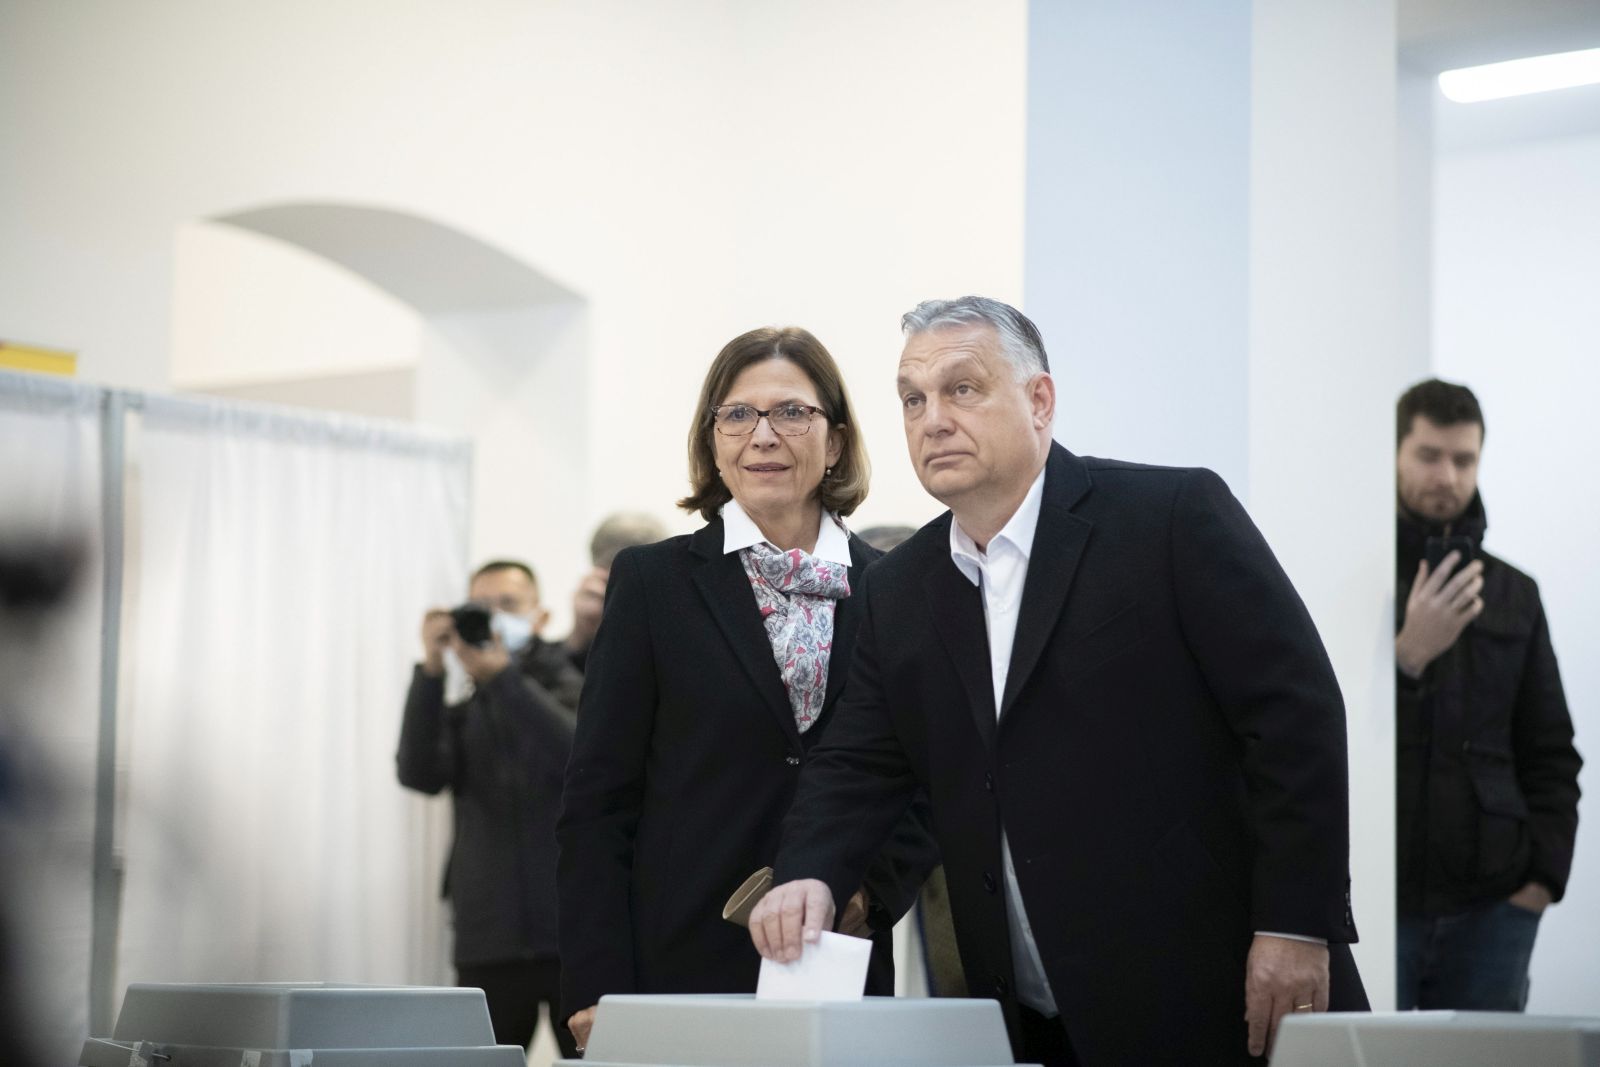 epa09867719 A handout photo made available by the Hungarian PM's Press Office shows Hungarian Prime Minister Viktor Orban (R) and his wife, Aniko Levai (L) cast their vote for the general election and national referendum on the child protection law, in Budapest, Hungary, 03 April 2022.  EPA/BENKO VIVIEN CHER / HUNGARIAN PM PRESS OFFICE HANDOUT  HANDOUT EDITORIAL USE ONLY/NO SALES